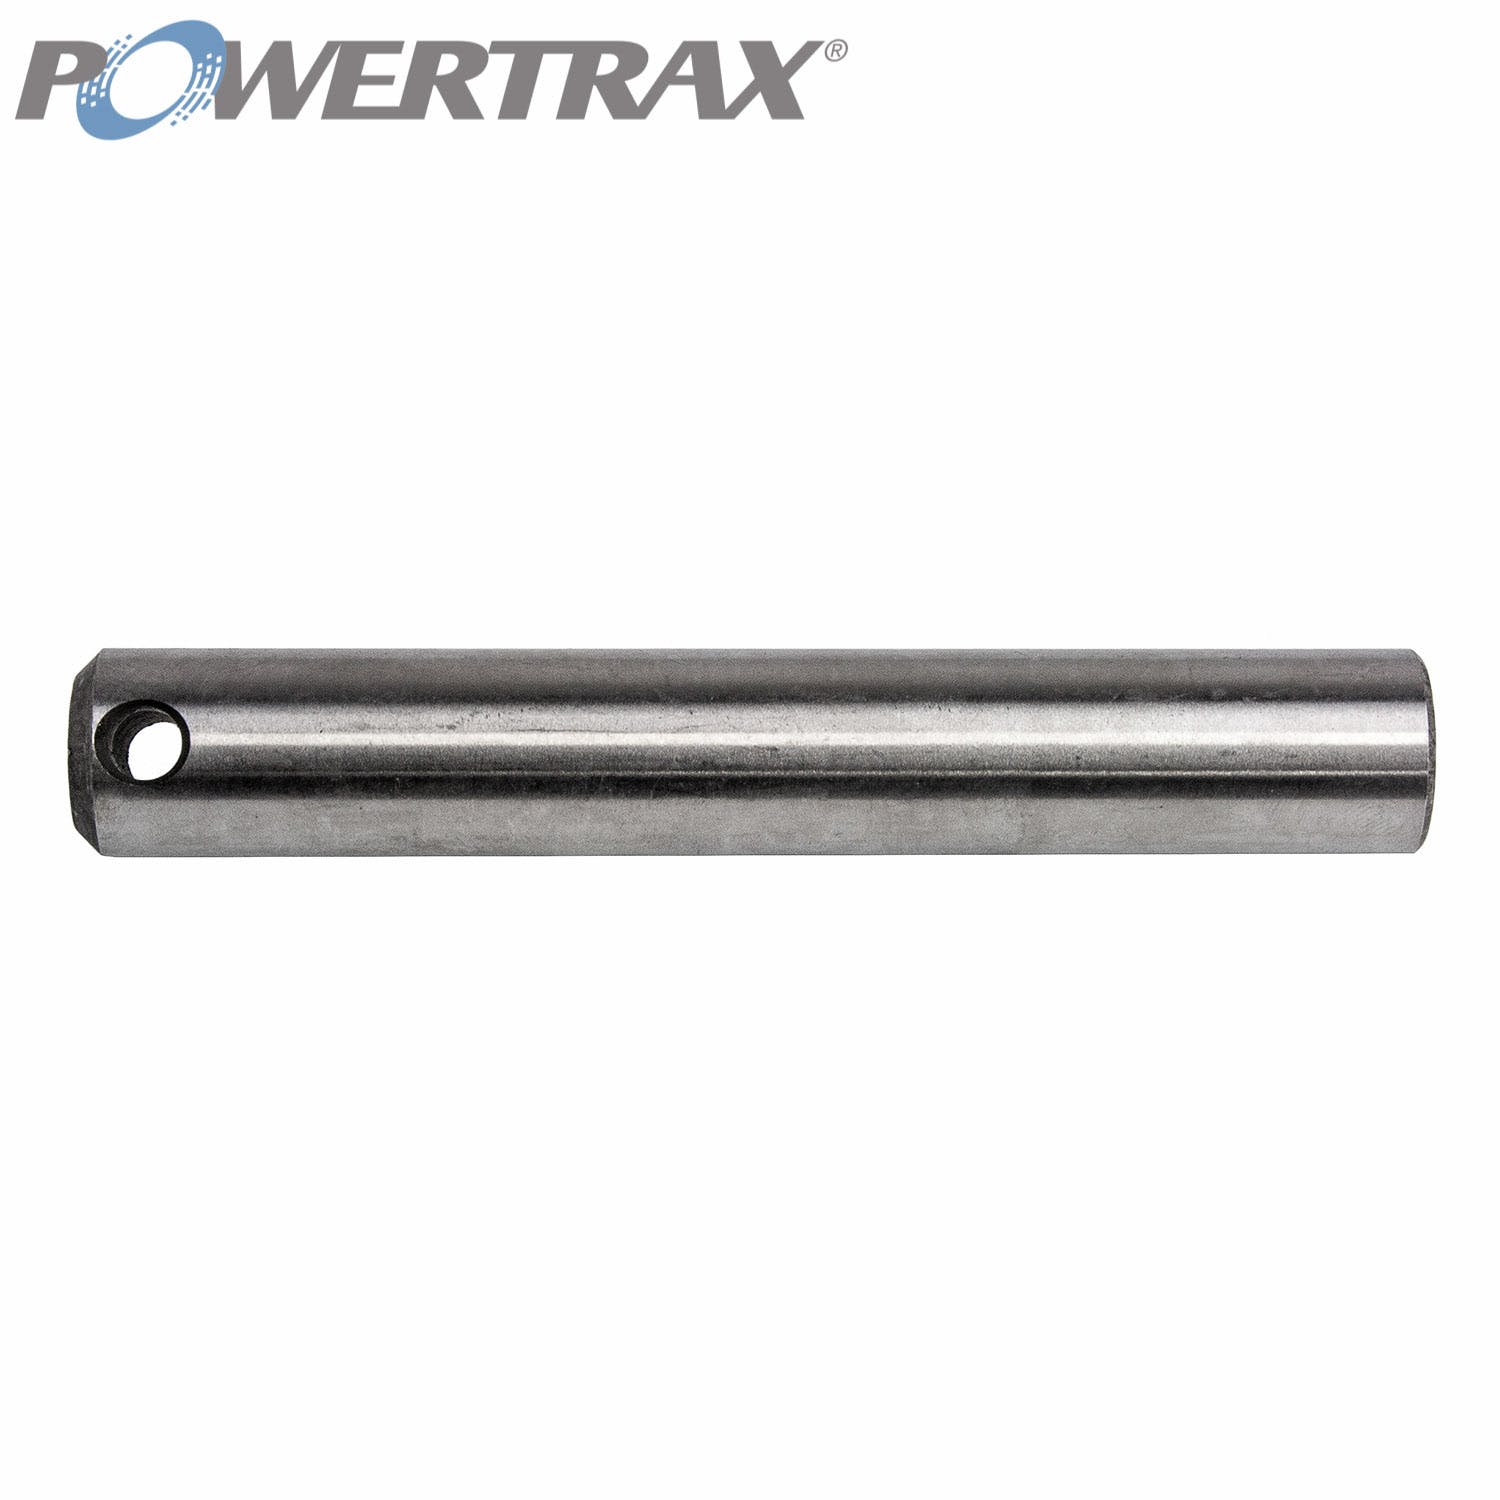 PowerTrax SD2210 Differential Pinion Shaft